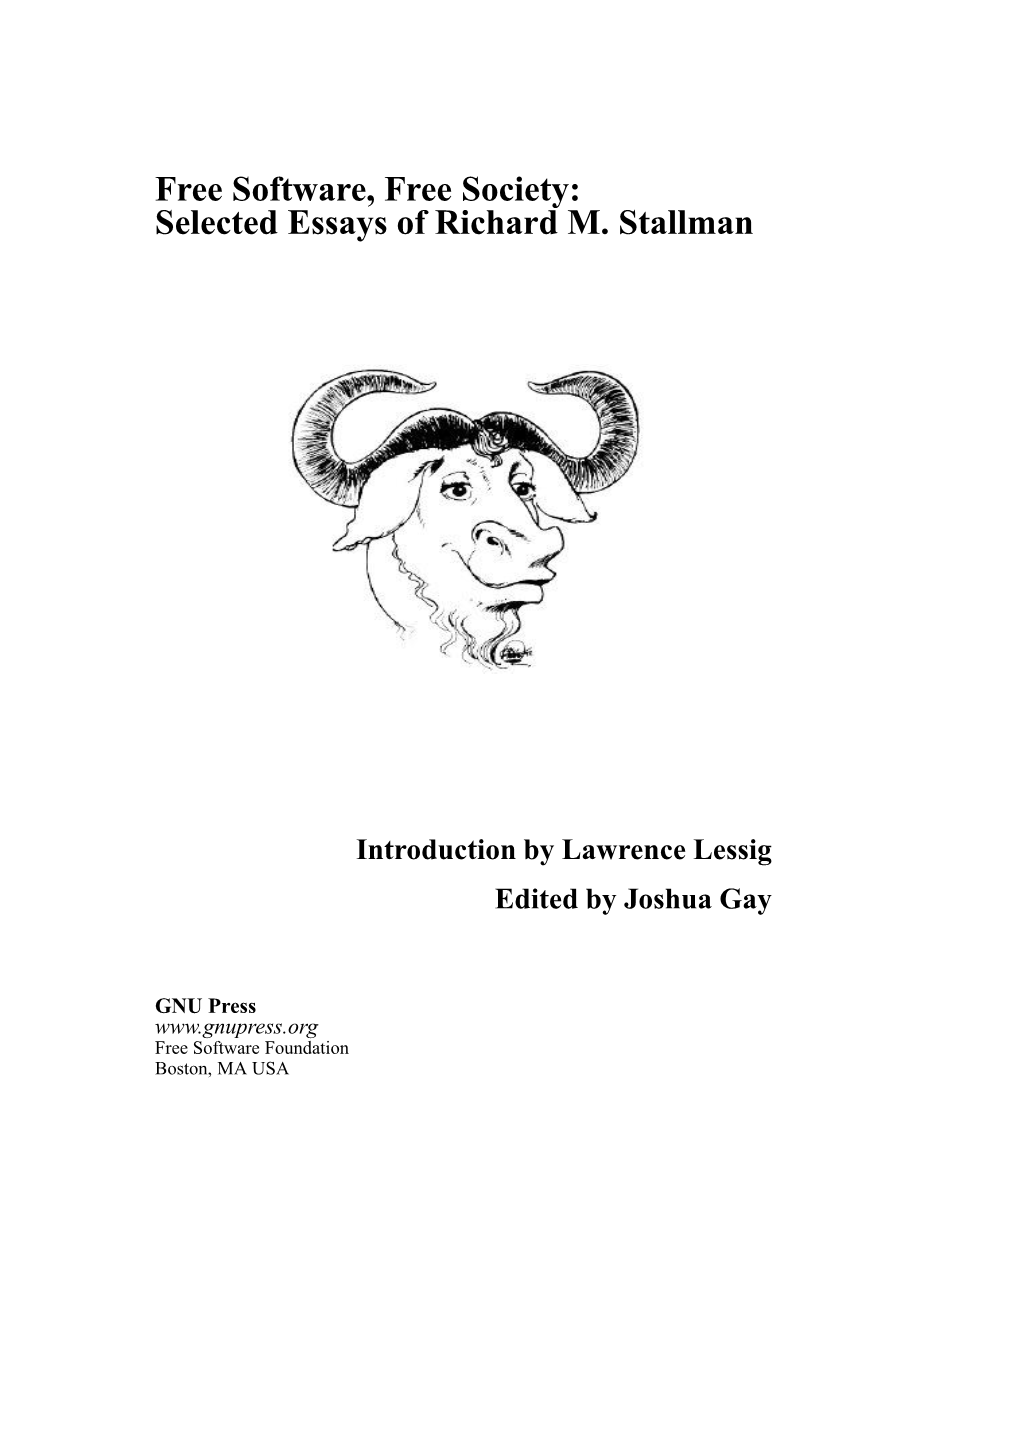 Free Software, Free Society: Selected Essays of Richard M